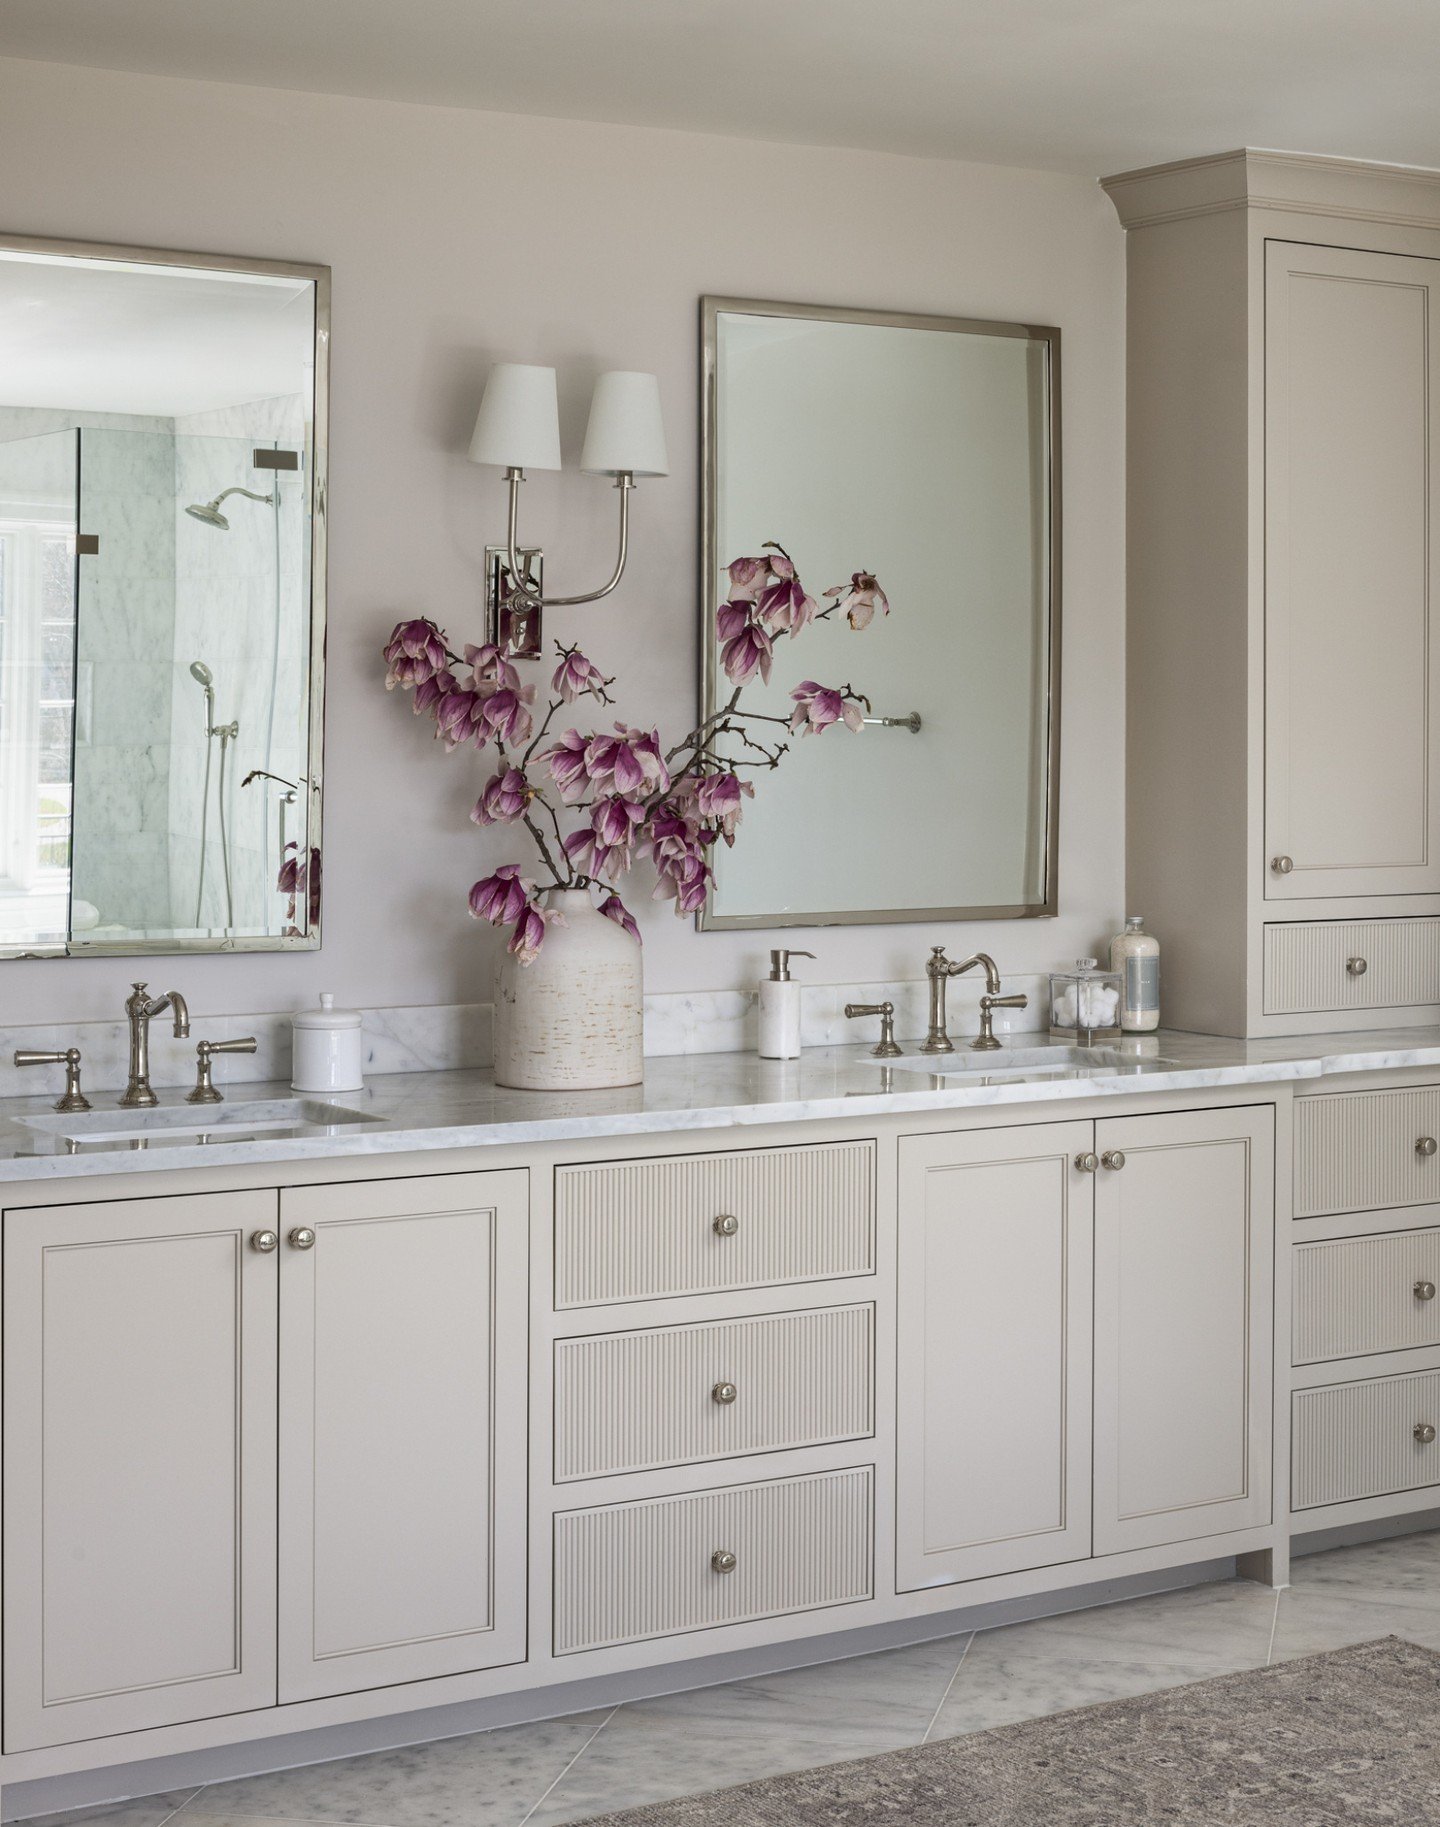 This bathroom oasis is beautiful and amazing.  Do we have to wait a year until next Mother's Day so we can have the day off? 🤣🌸

Photos | @jennverrierphoto
Cabinetry | @studio37cabinetry
Build | @brusharborhomes

.
.
.

#whcdesignthatrestores #bath